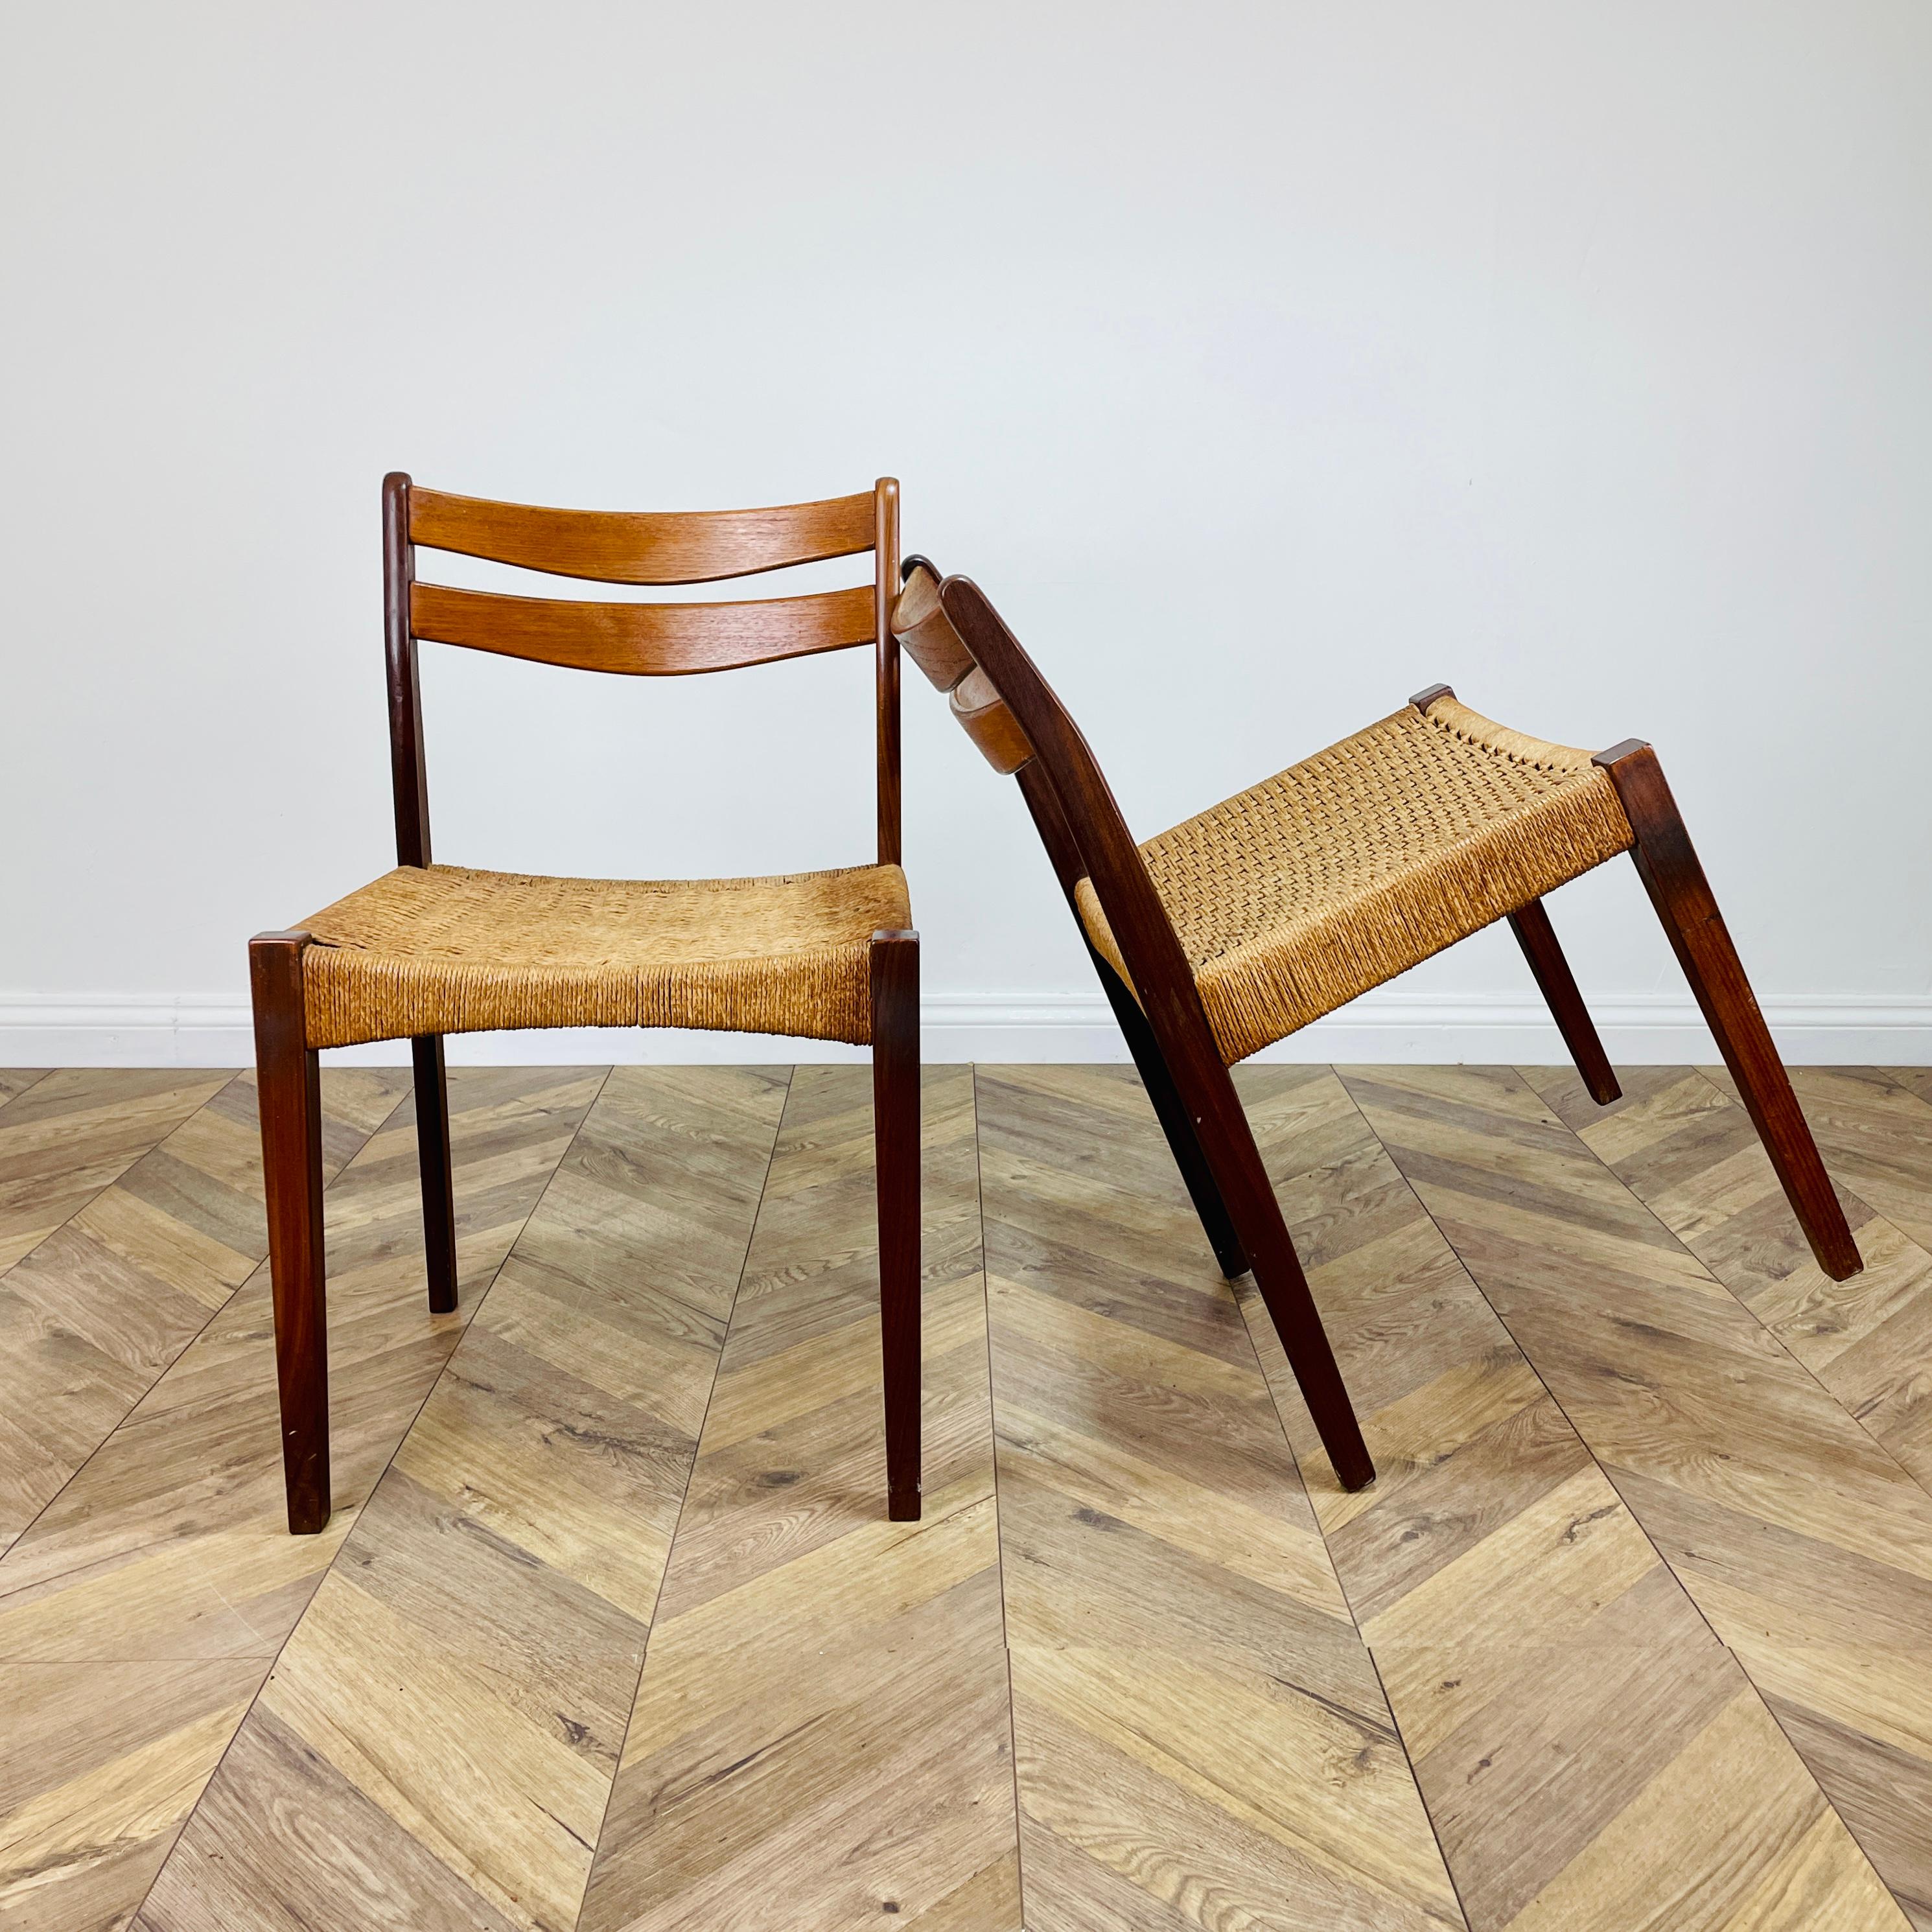 A Pair of Beautiful Dining Chairs, Designed by Arne Hovmand Olsen for Mogens Kold in Denmark. Circa 1960s.

Teak framed with handwoven original paper cord seating. The cord is flexible so shapes to each person. The gently curved backrest offers